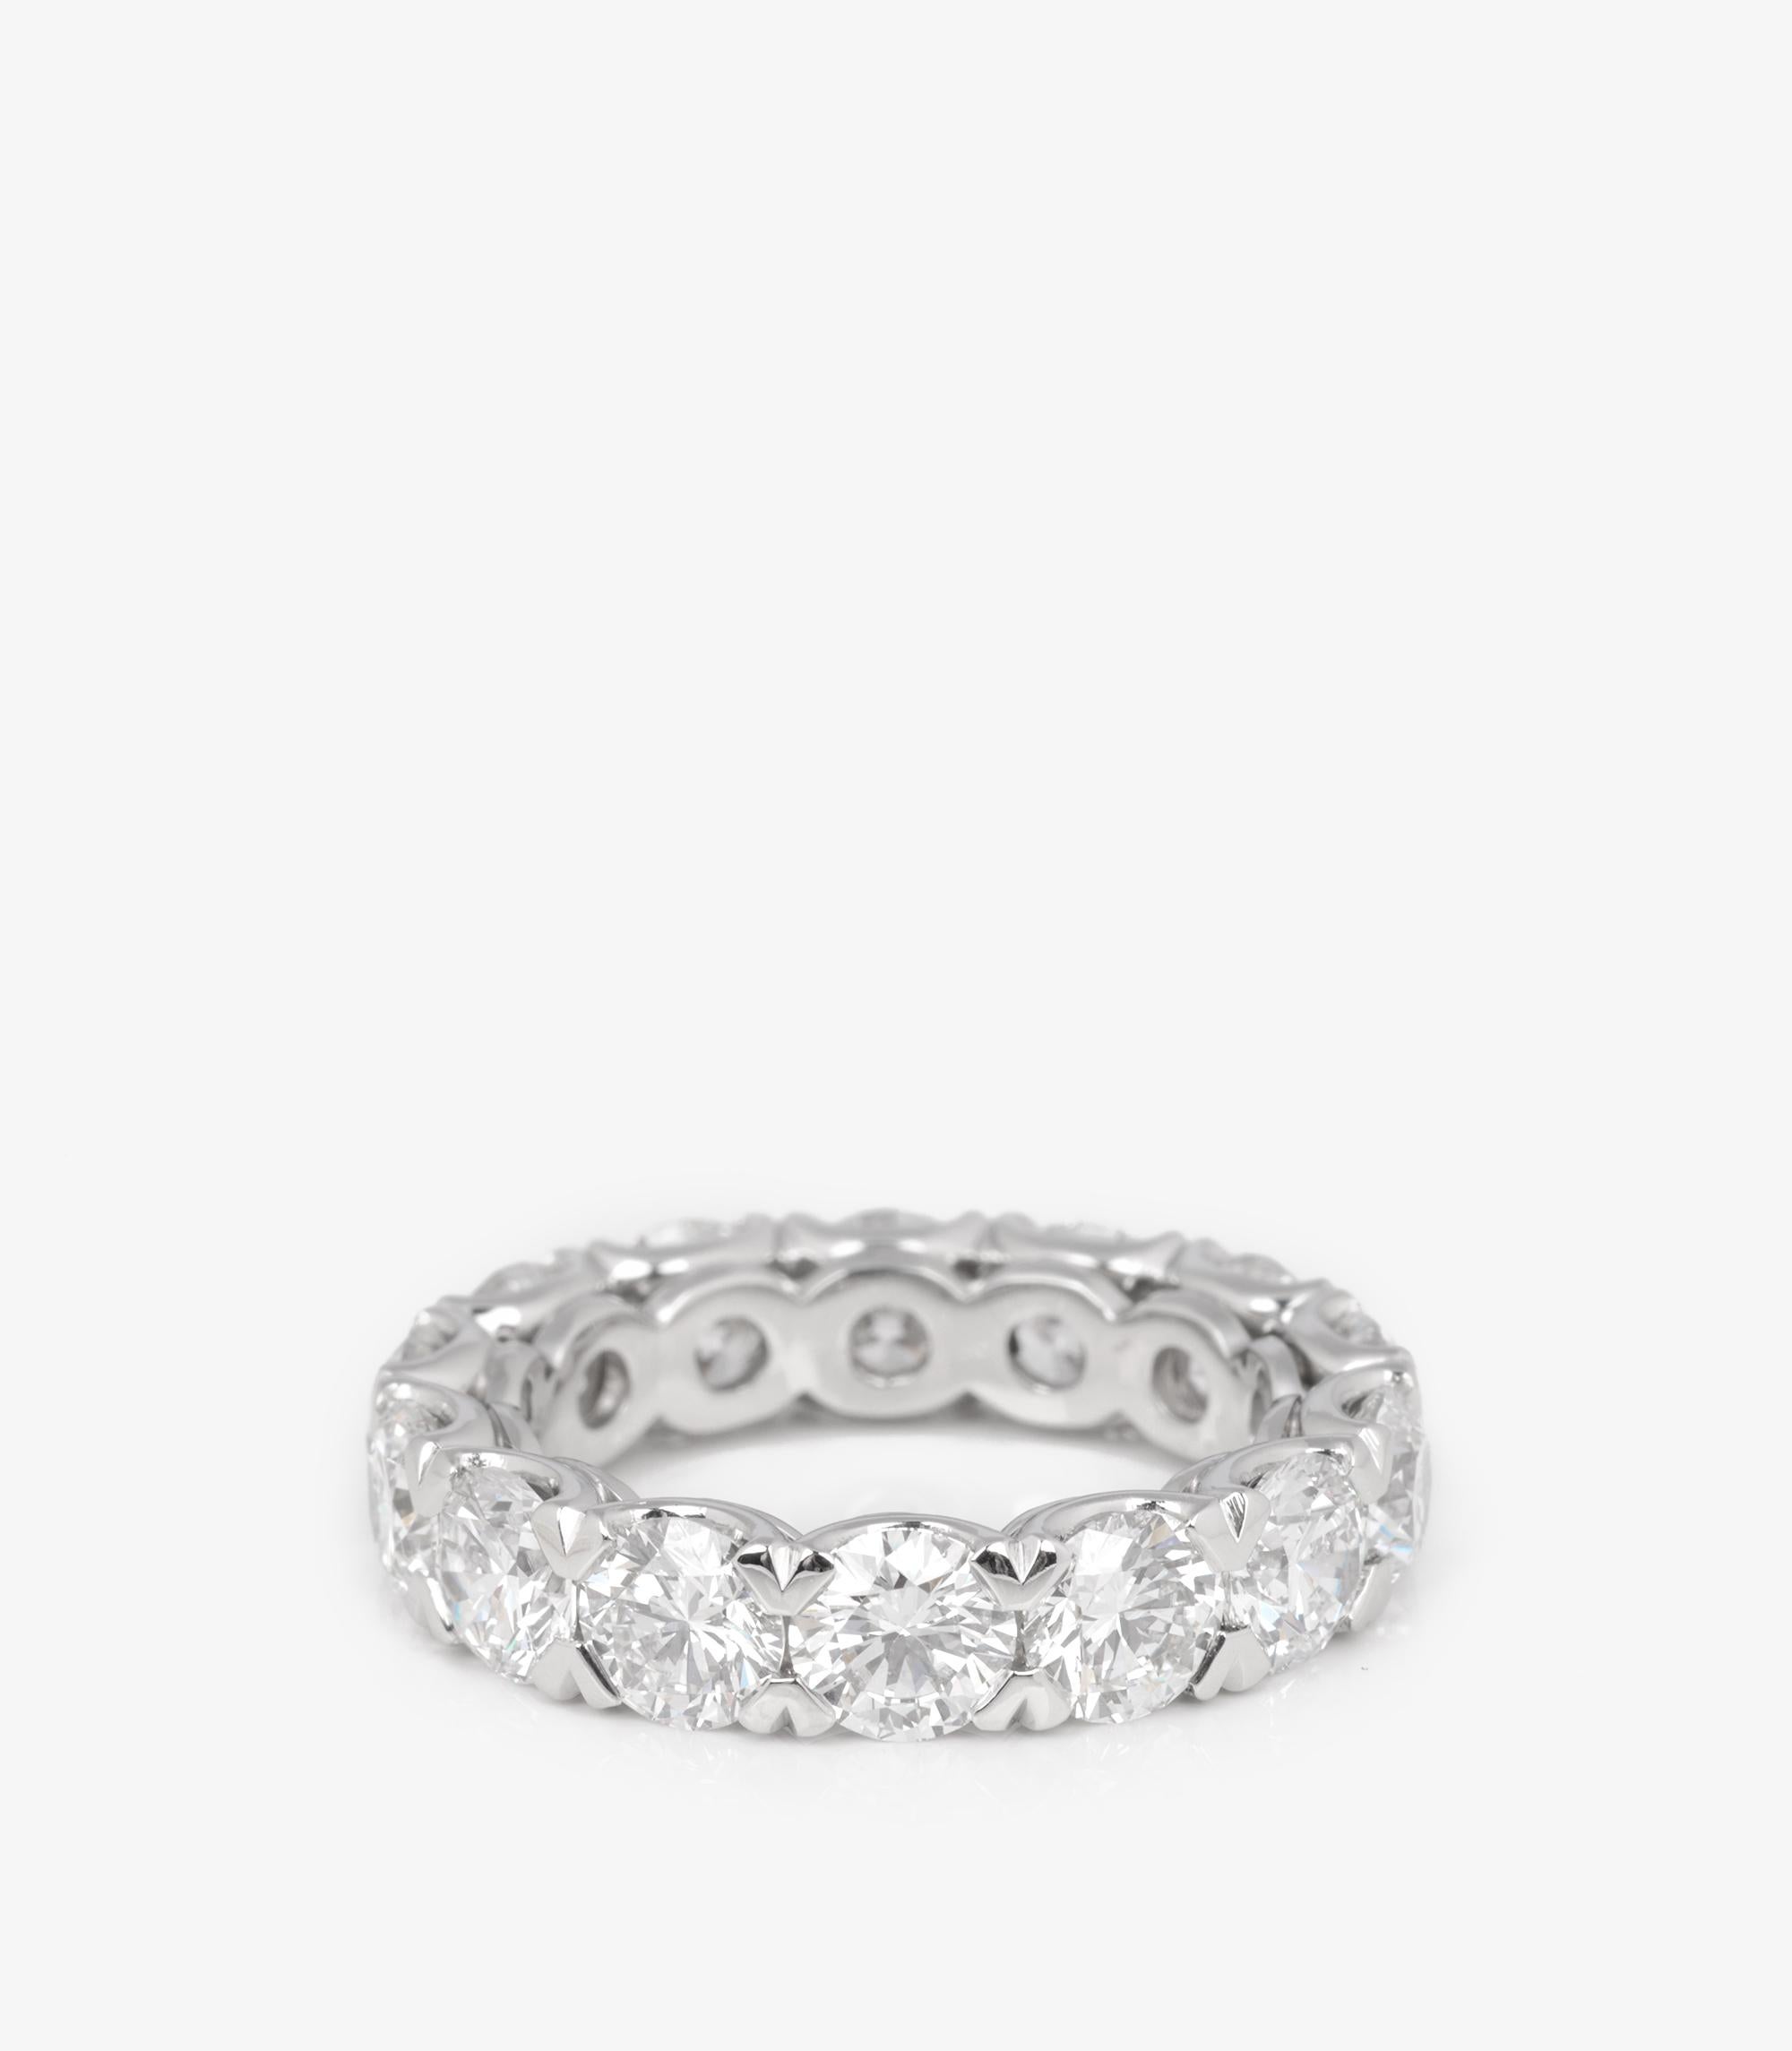 Boodles Brilliant Cut 6.01ct Diamond Platinum Full Eternity Ring

Brand Boodles
Model Full Eternity Ring
Product Type Ring
Age Circa 2010
Accompanied By Boodles Box, Sales Receipt, Valuation Certificate
Material(s) Platinum
Gemstone Diamond
UK Ring